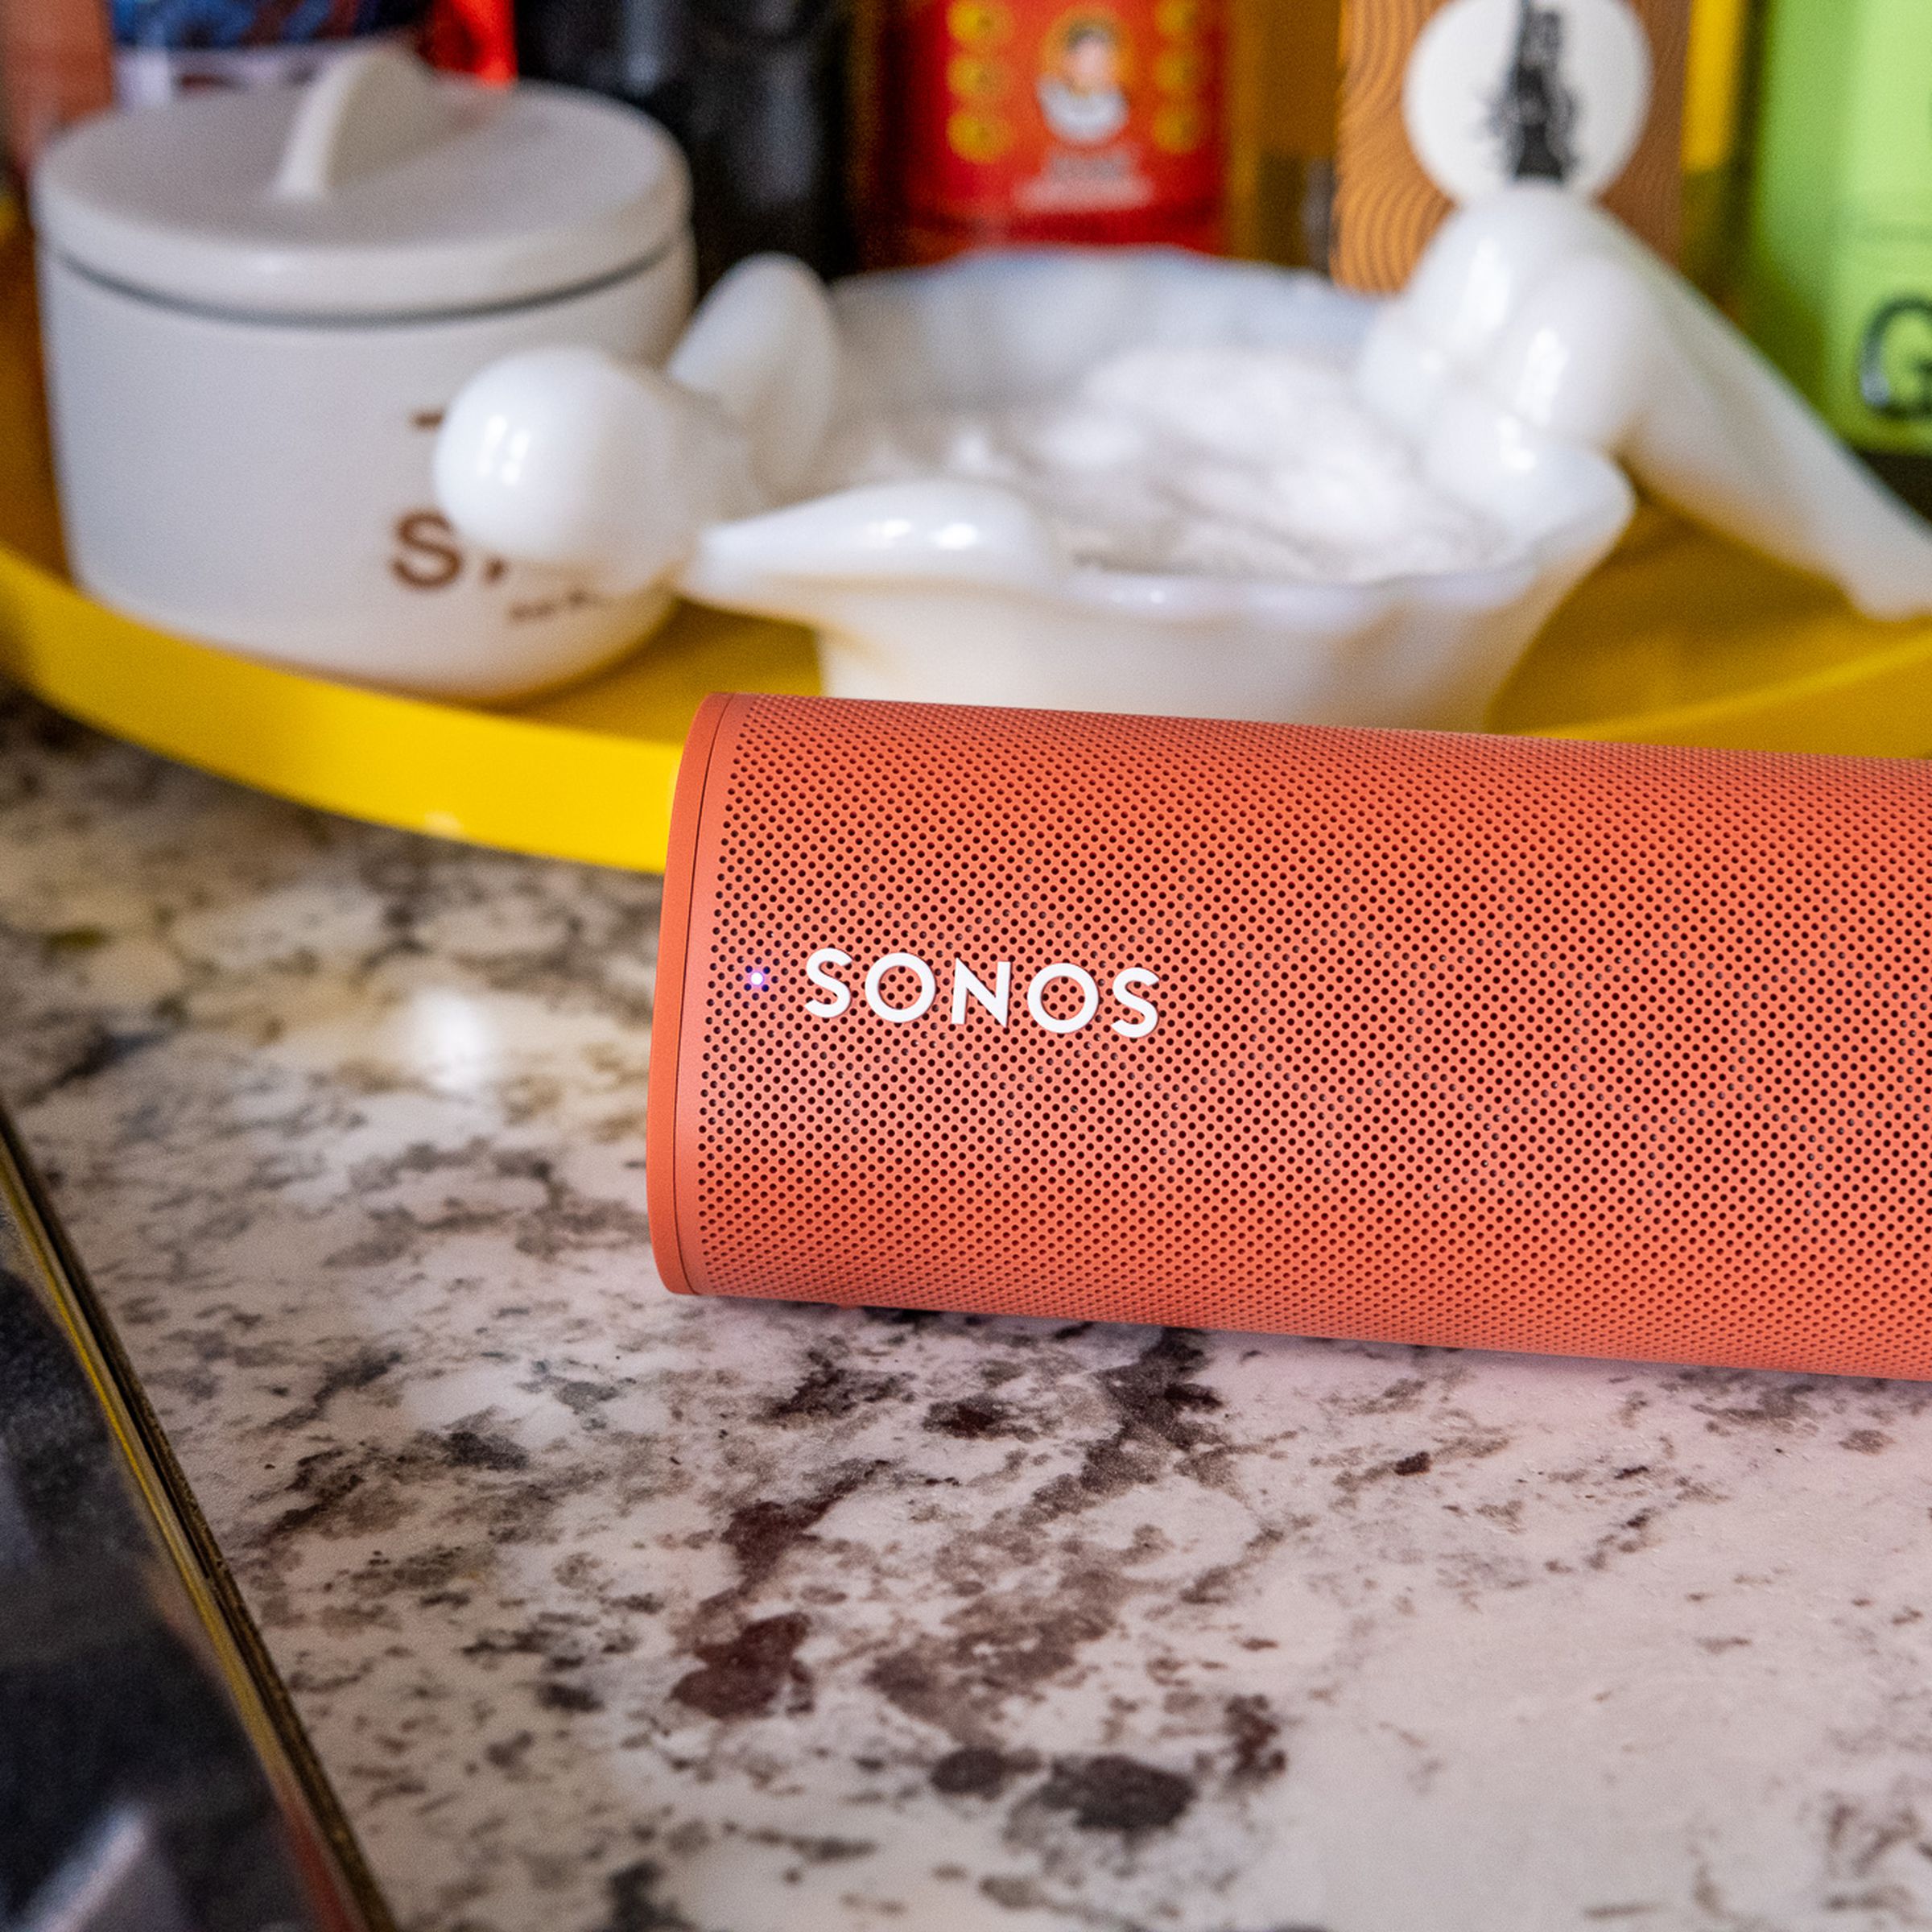 Sonos Voice Control is available on all of the company’s smart speakers.